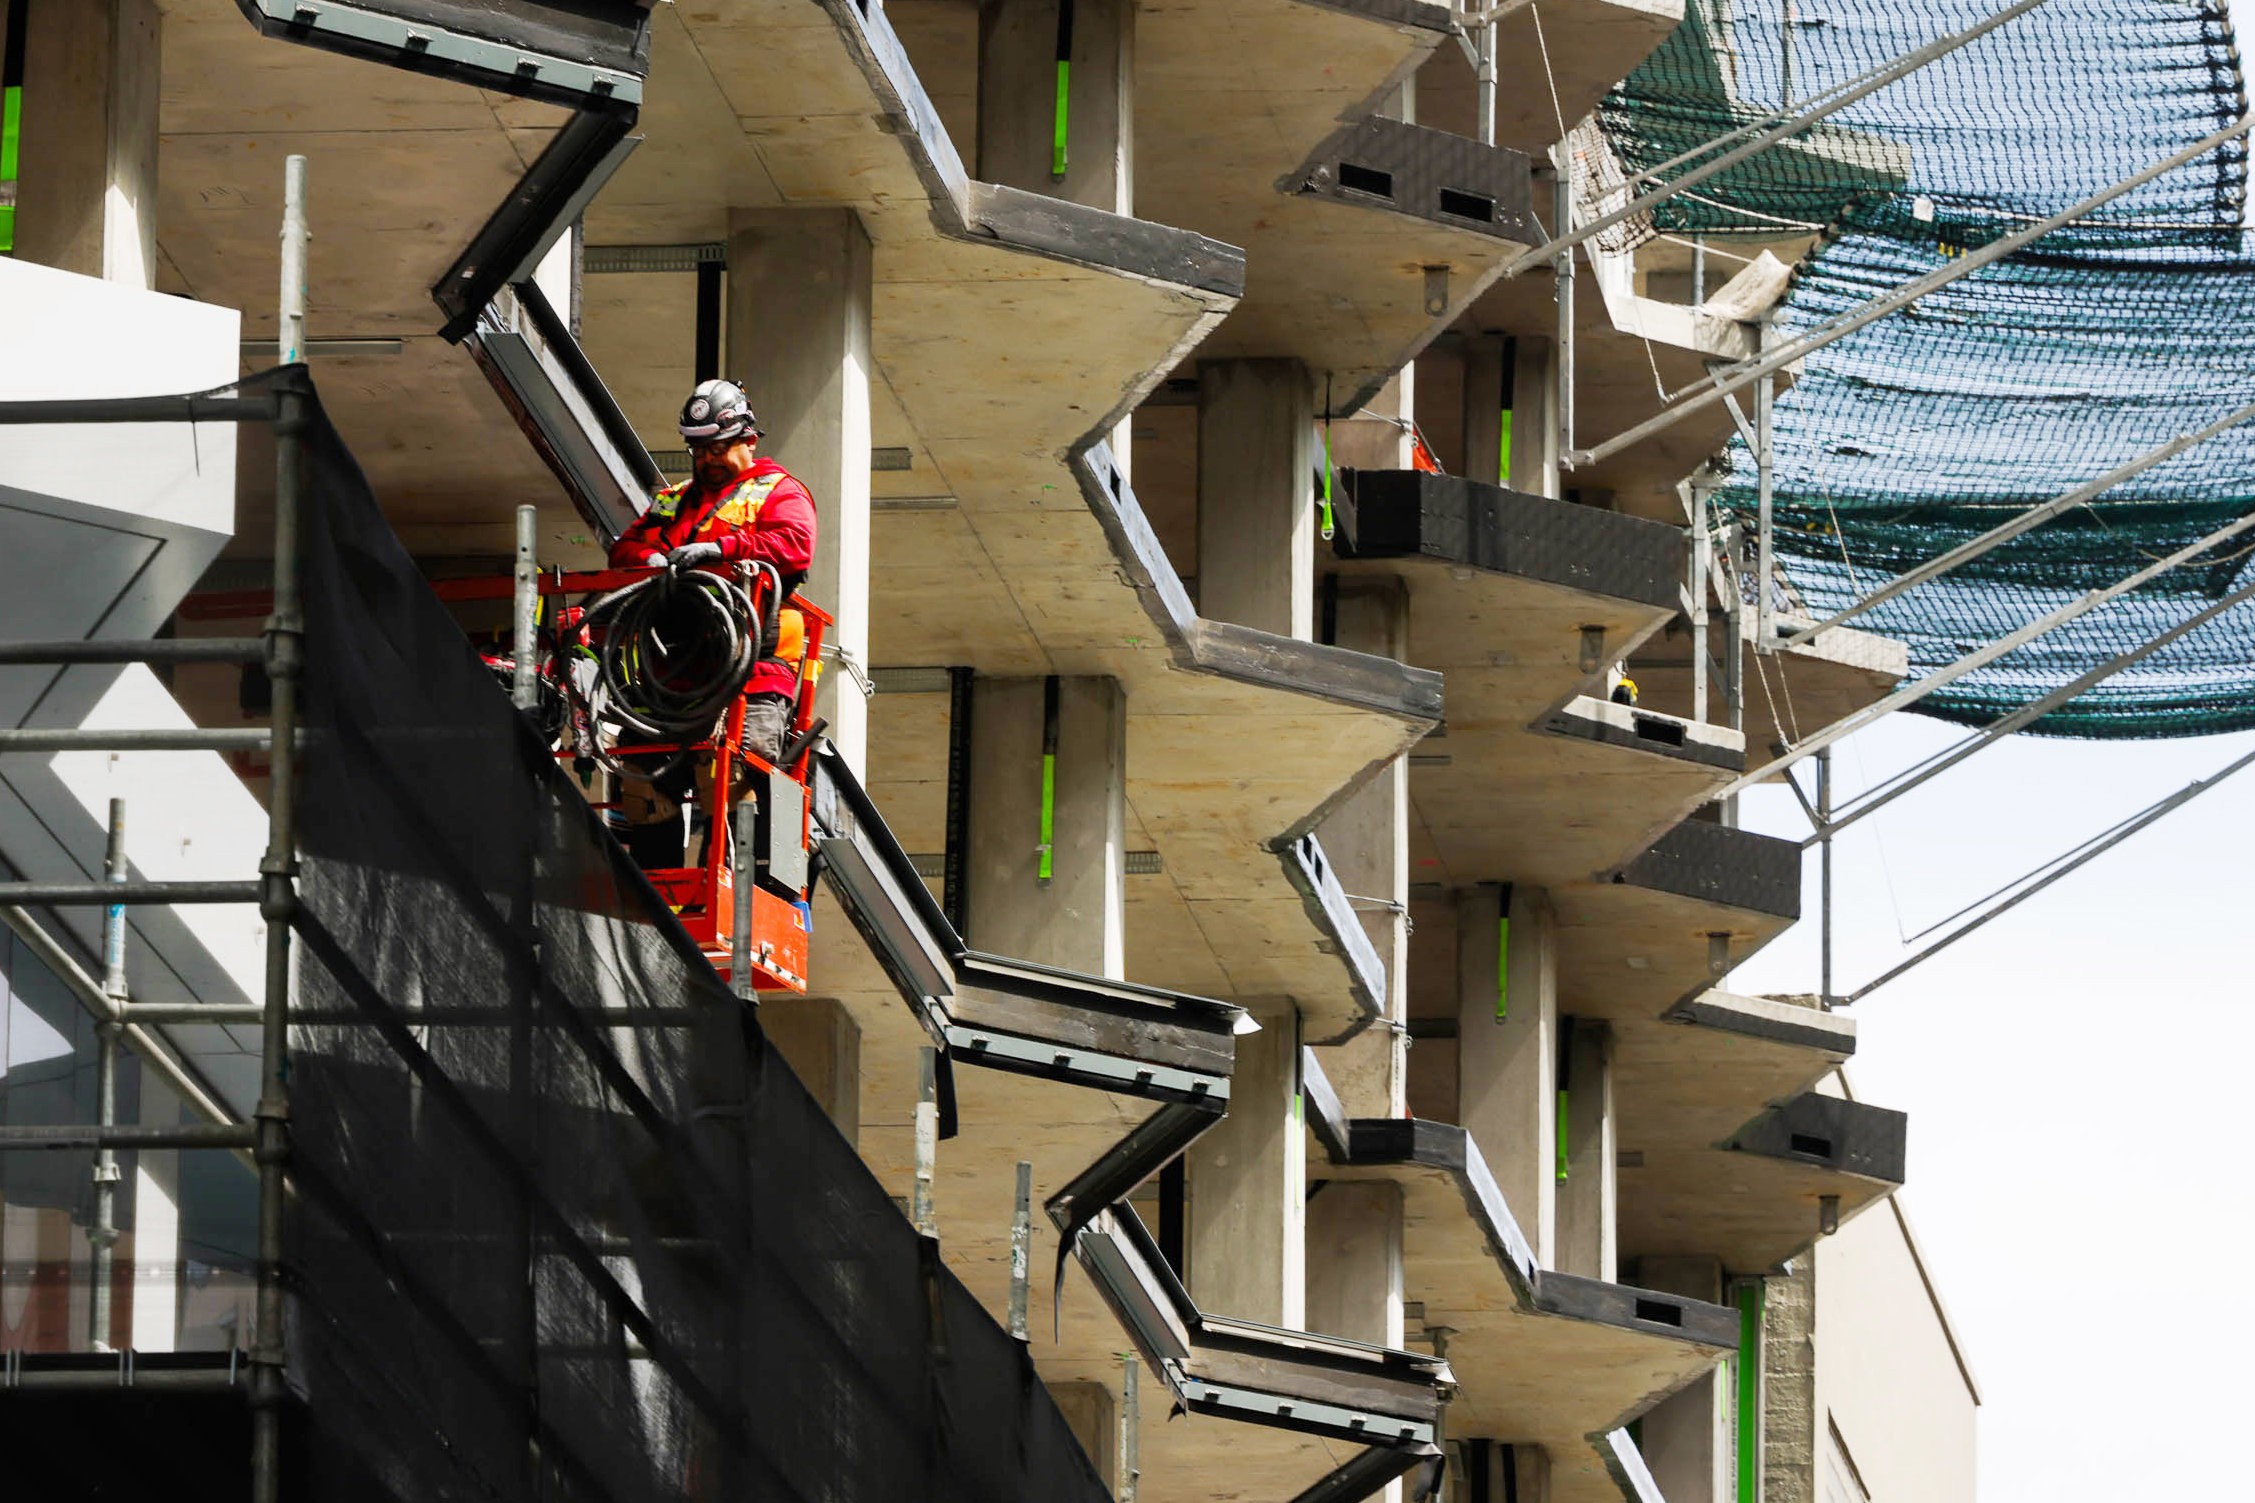 A construction worker in red outfit and safety gear operates a lift near a modern building with staggered concrete balconies and scaffolding with netting.